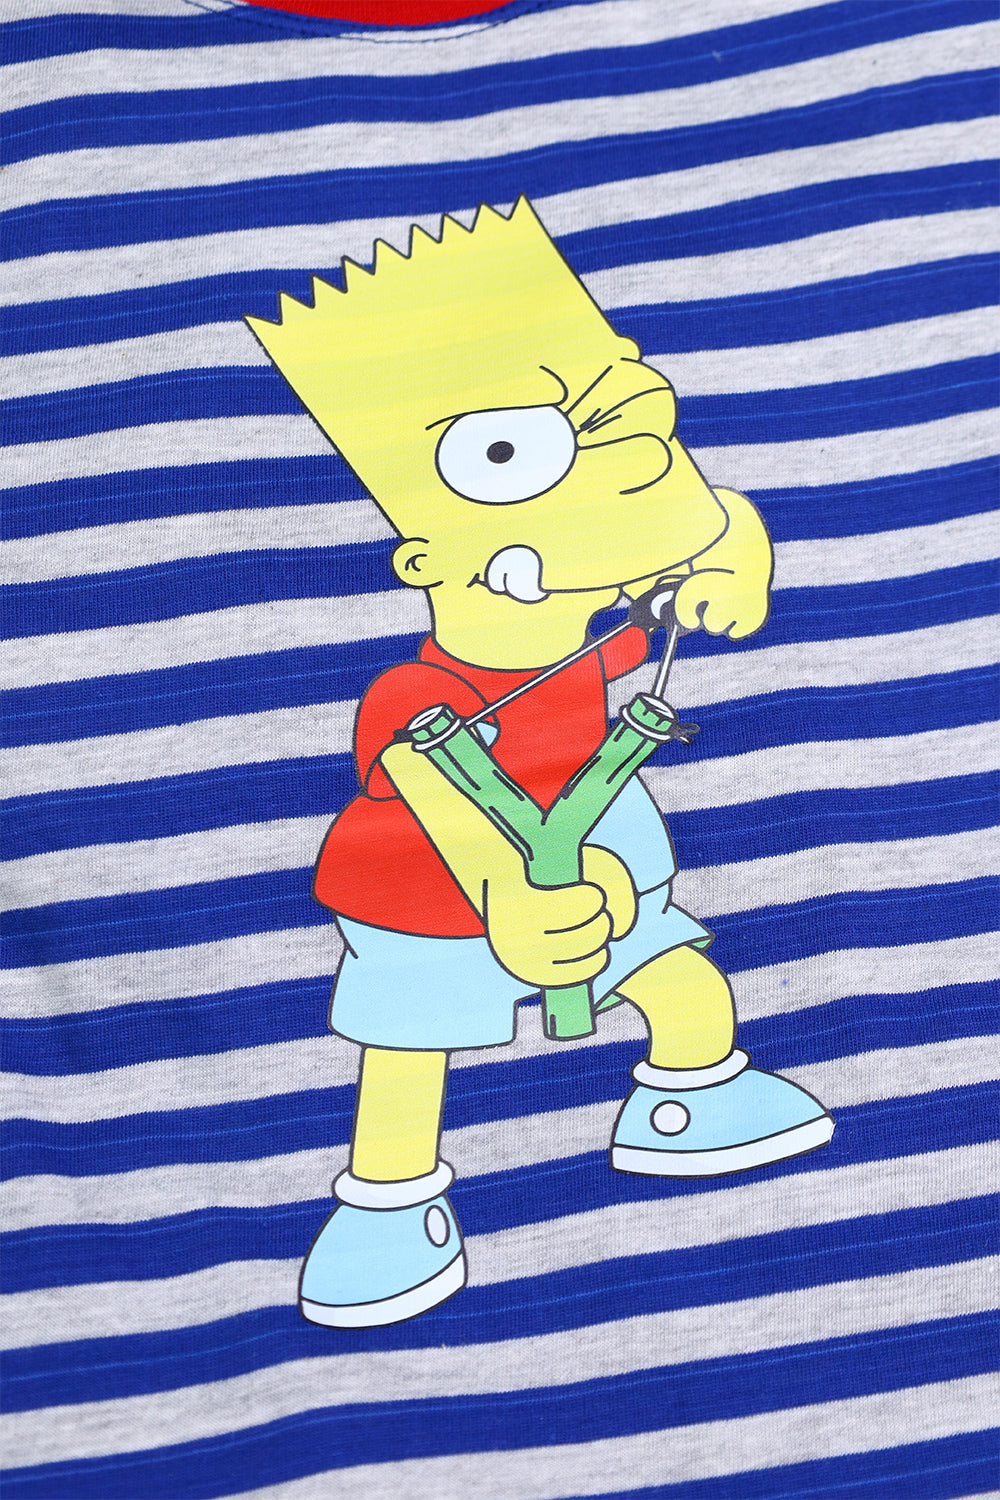 Simpsons graphic yarn dyed  T-shirt 100% cotton jersey fabric